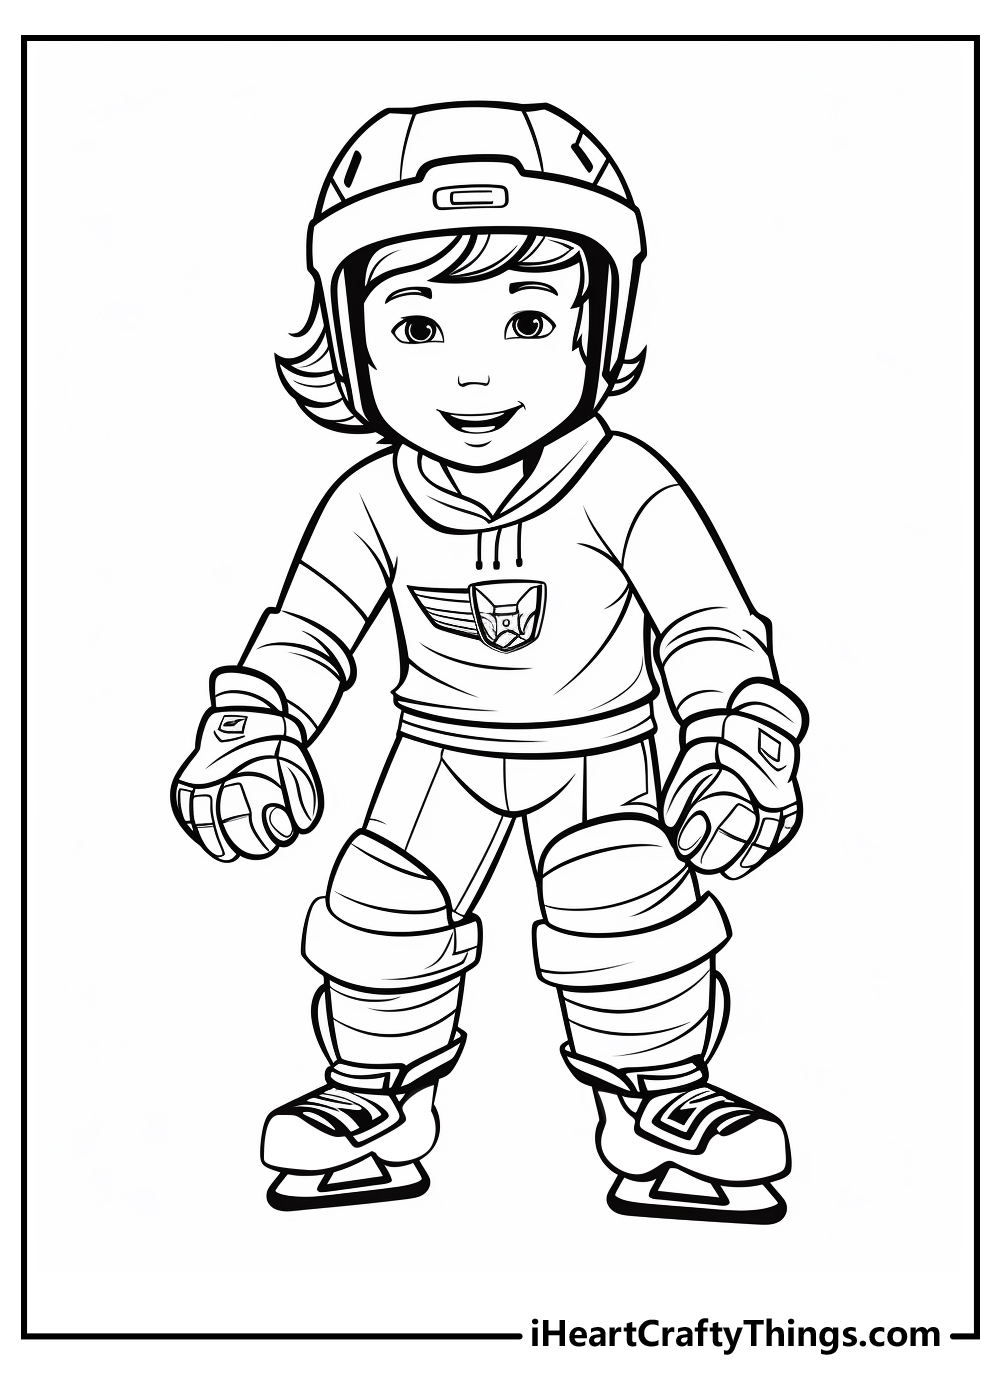 free hockey coloring pages